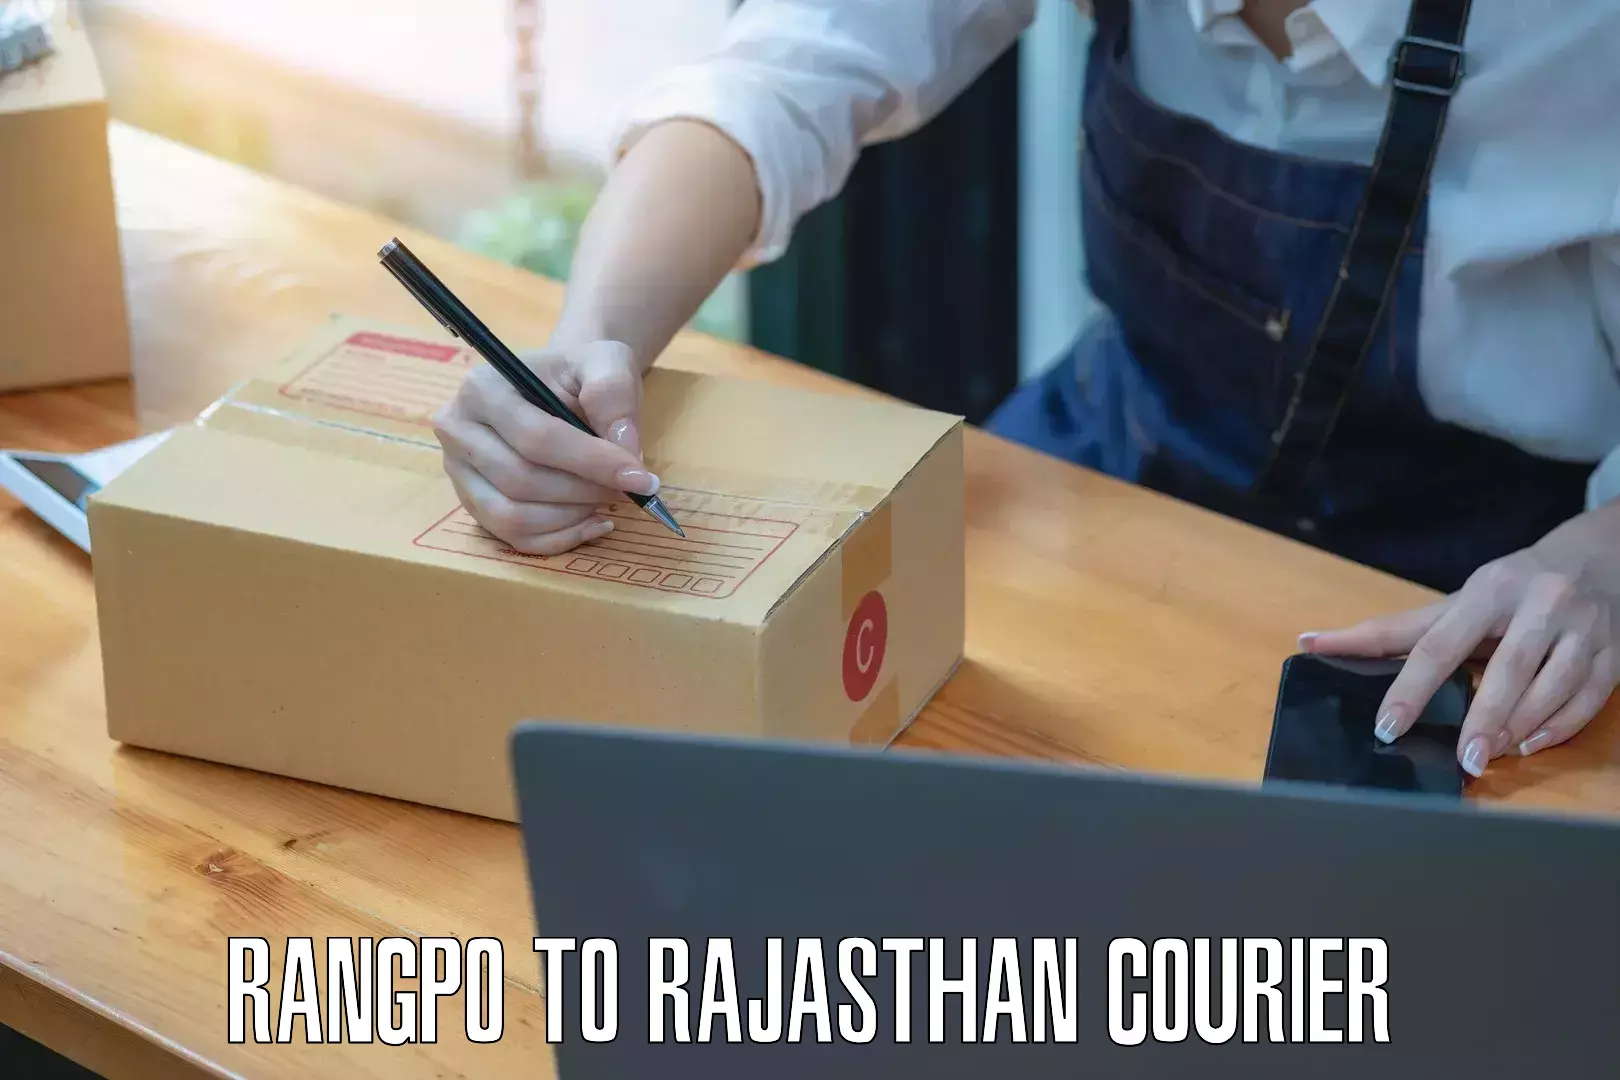 High-quality delivery services Rangpo to Banar